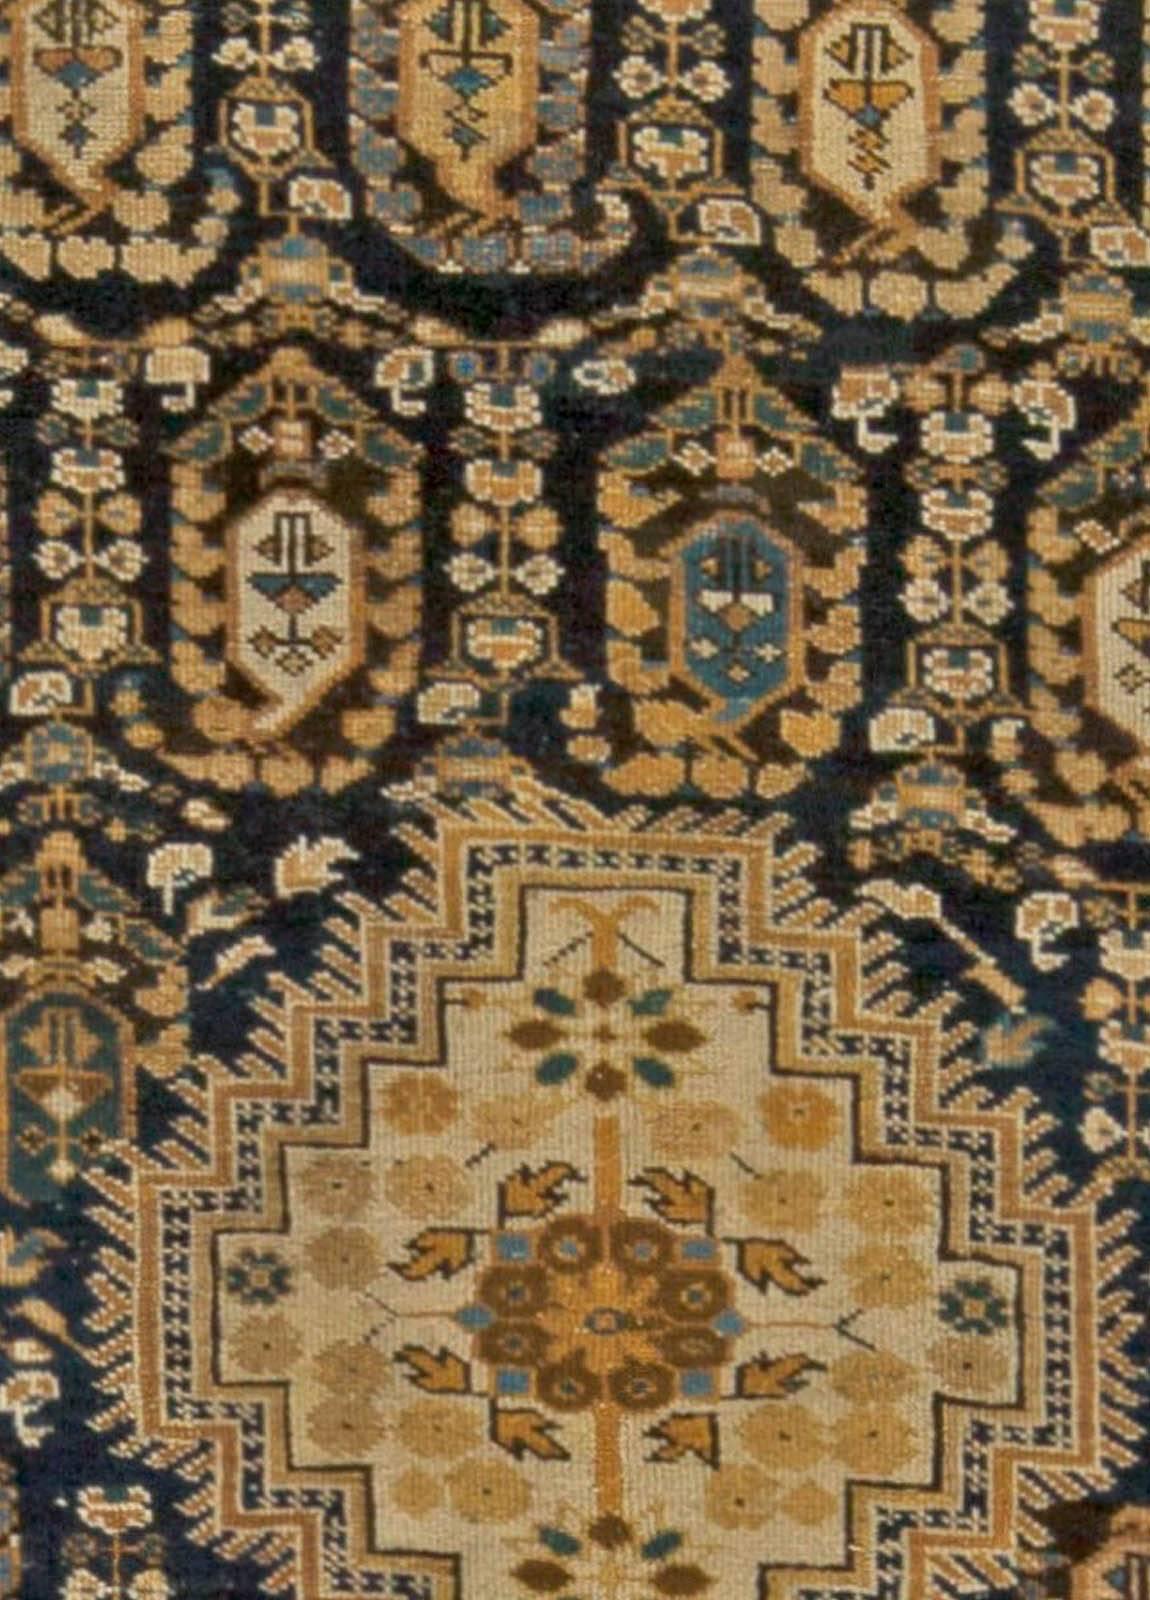 Antique Caucasian Shirvan hand knotted wool rug
Size: 5'2